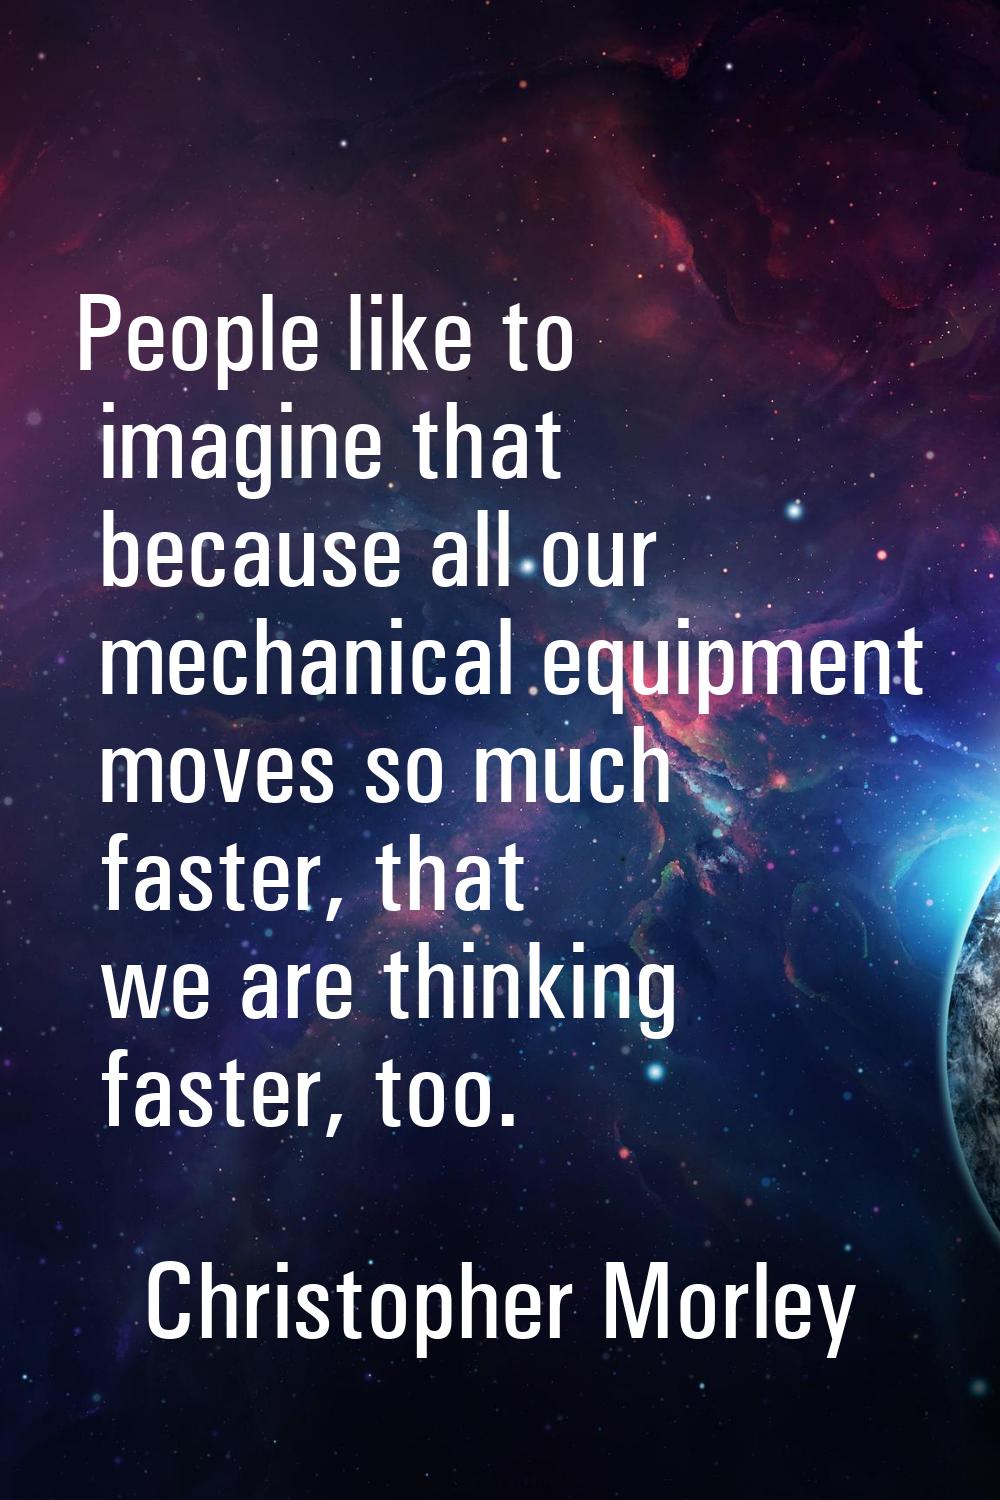 People like to imagine that because all our mechanical equipment moves so much faster, that we are 